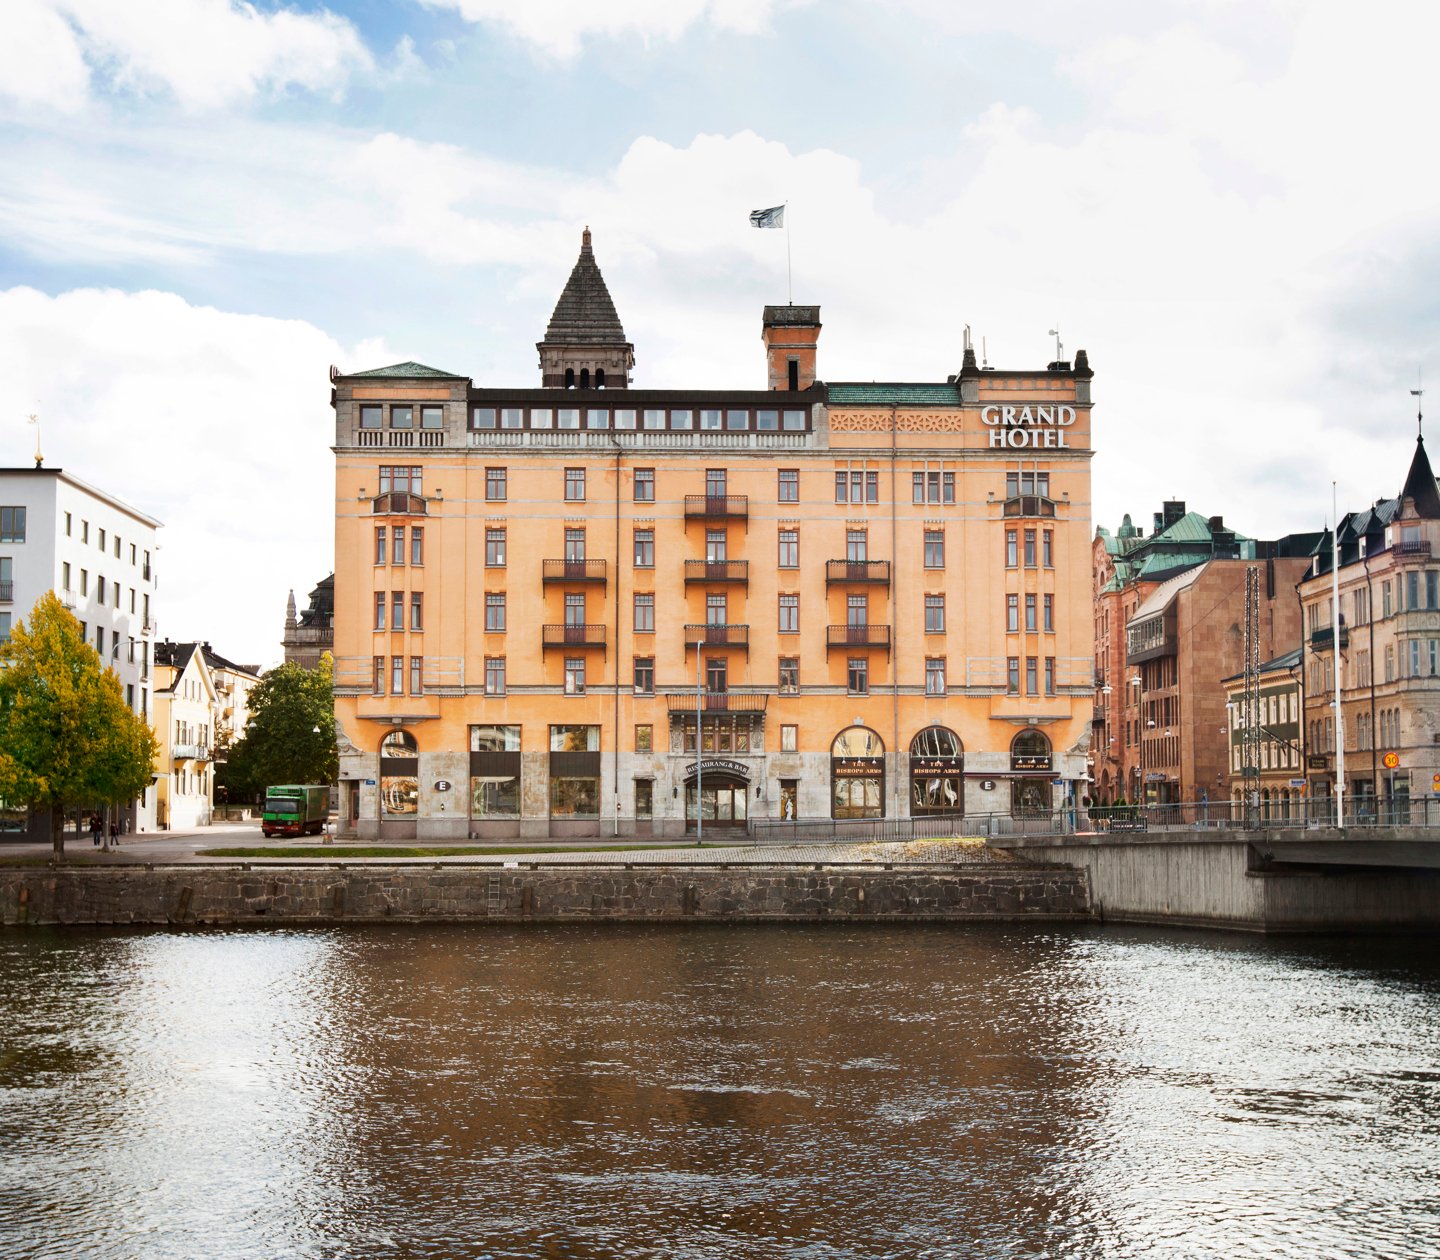 The orange facade of the Elite Grand Hotel in Norrköping with Motala Ström in front